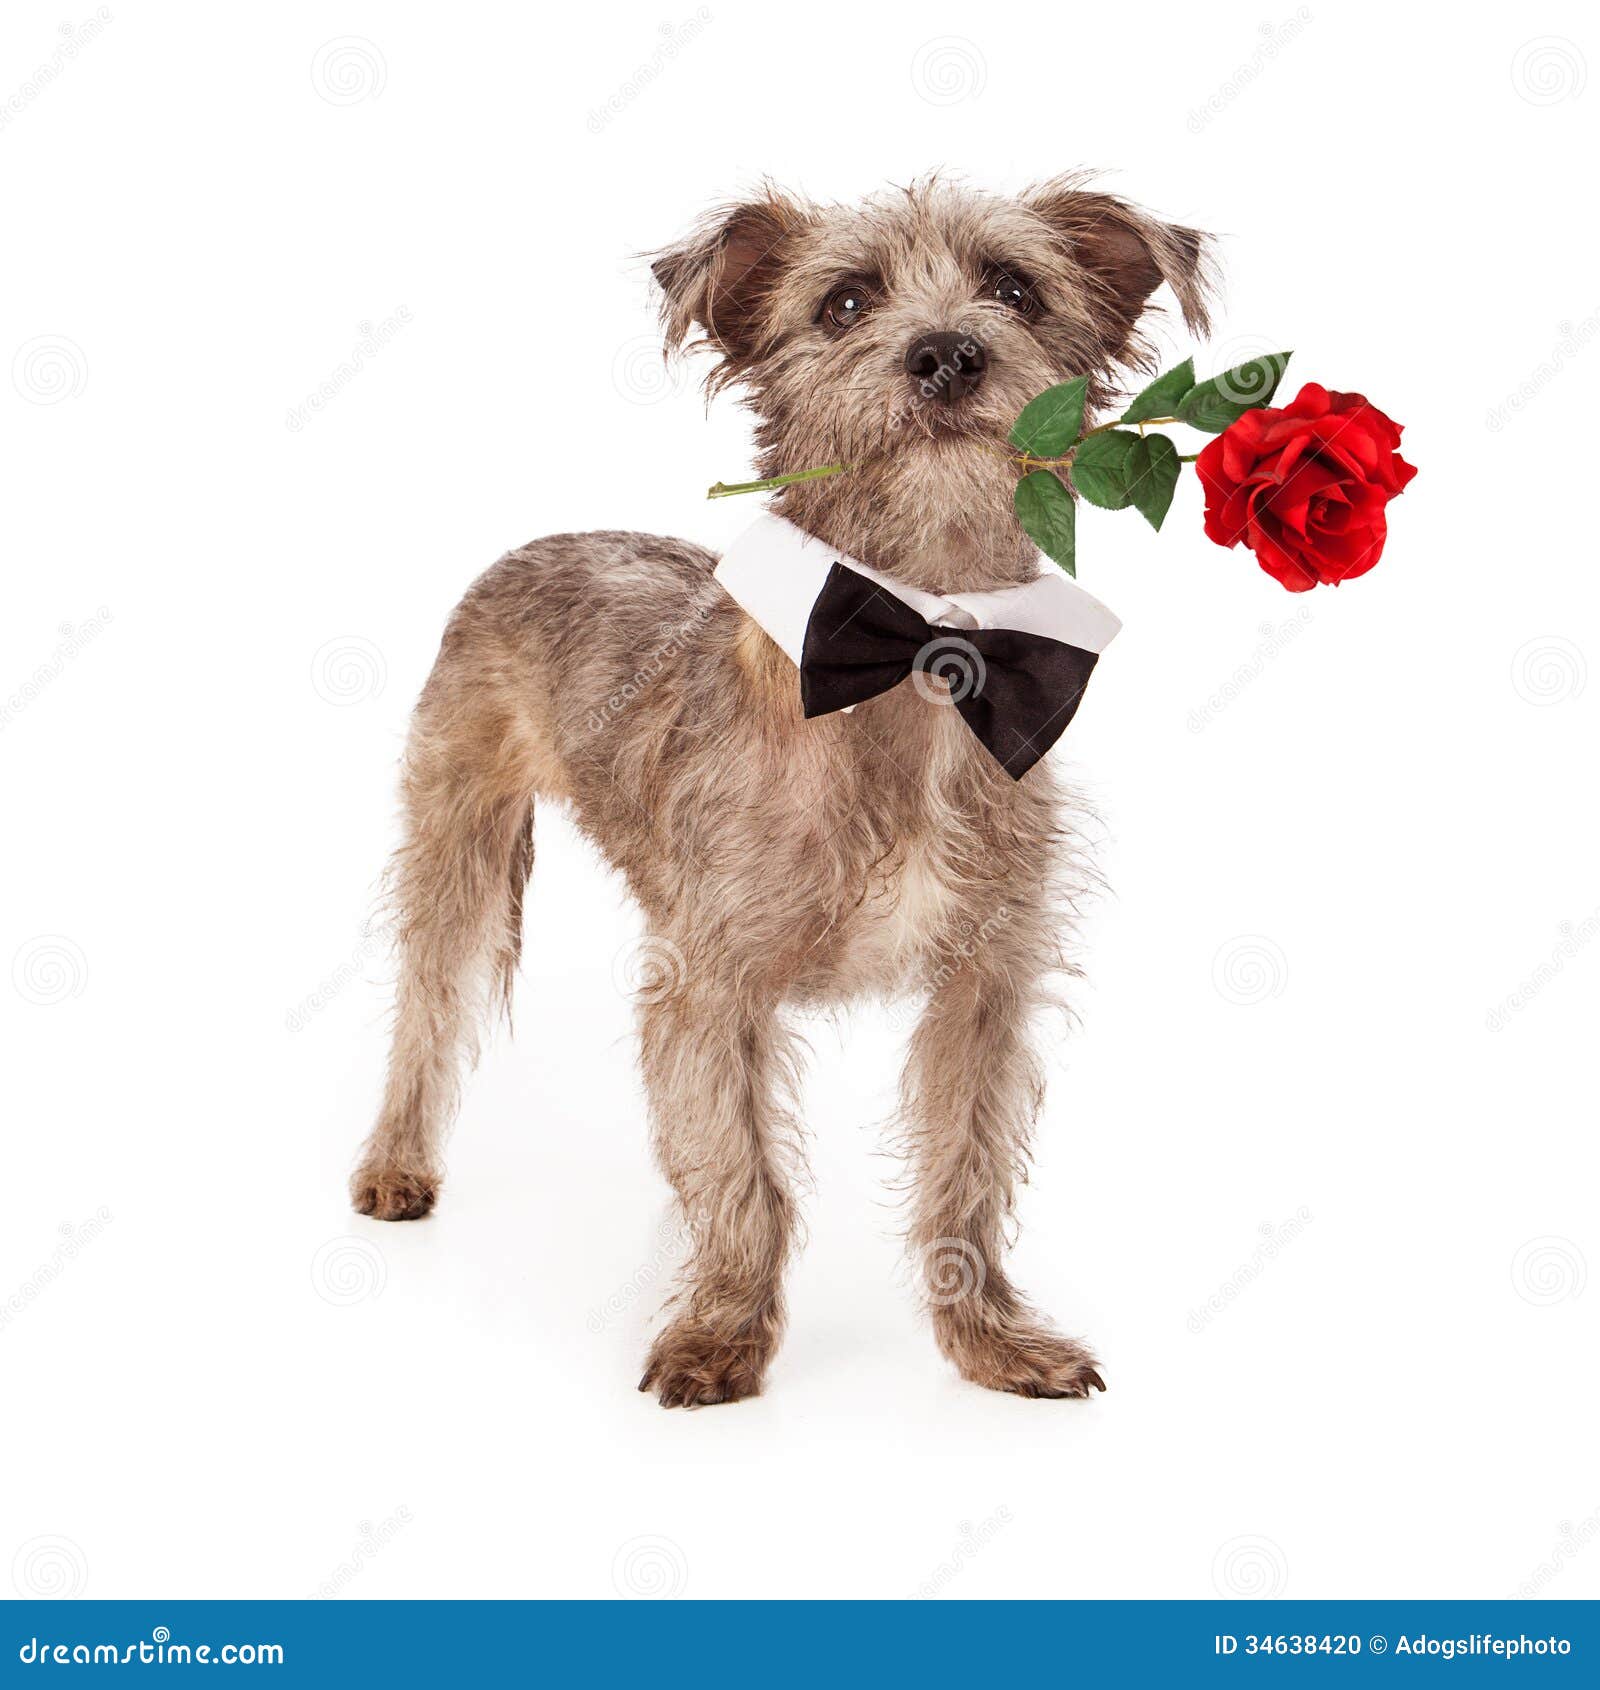 Terrier Mix With Rose And Bow Tie Stock Photo - Image ...